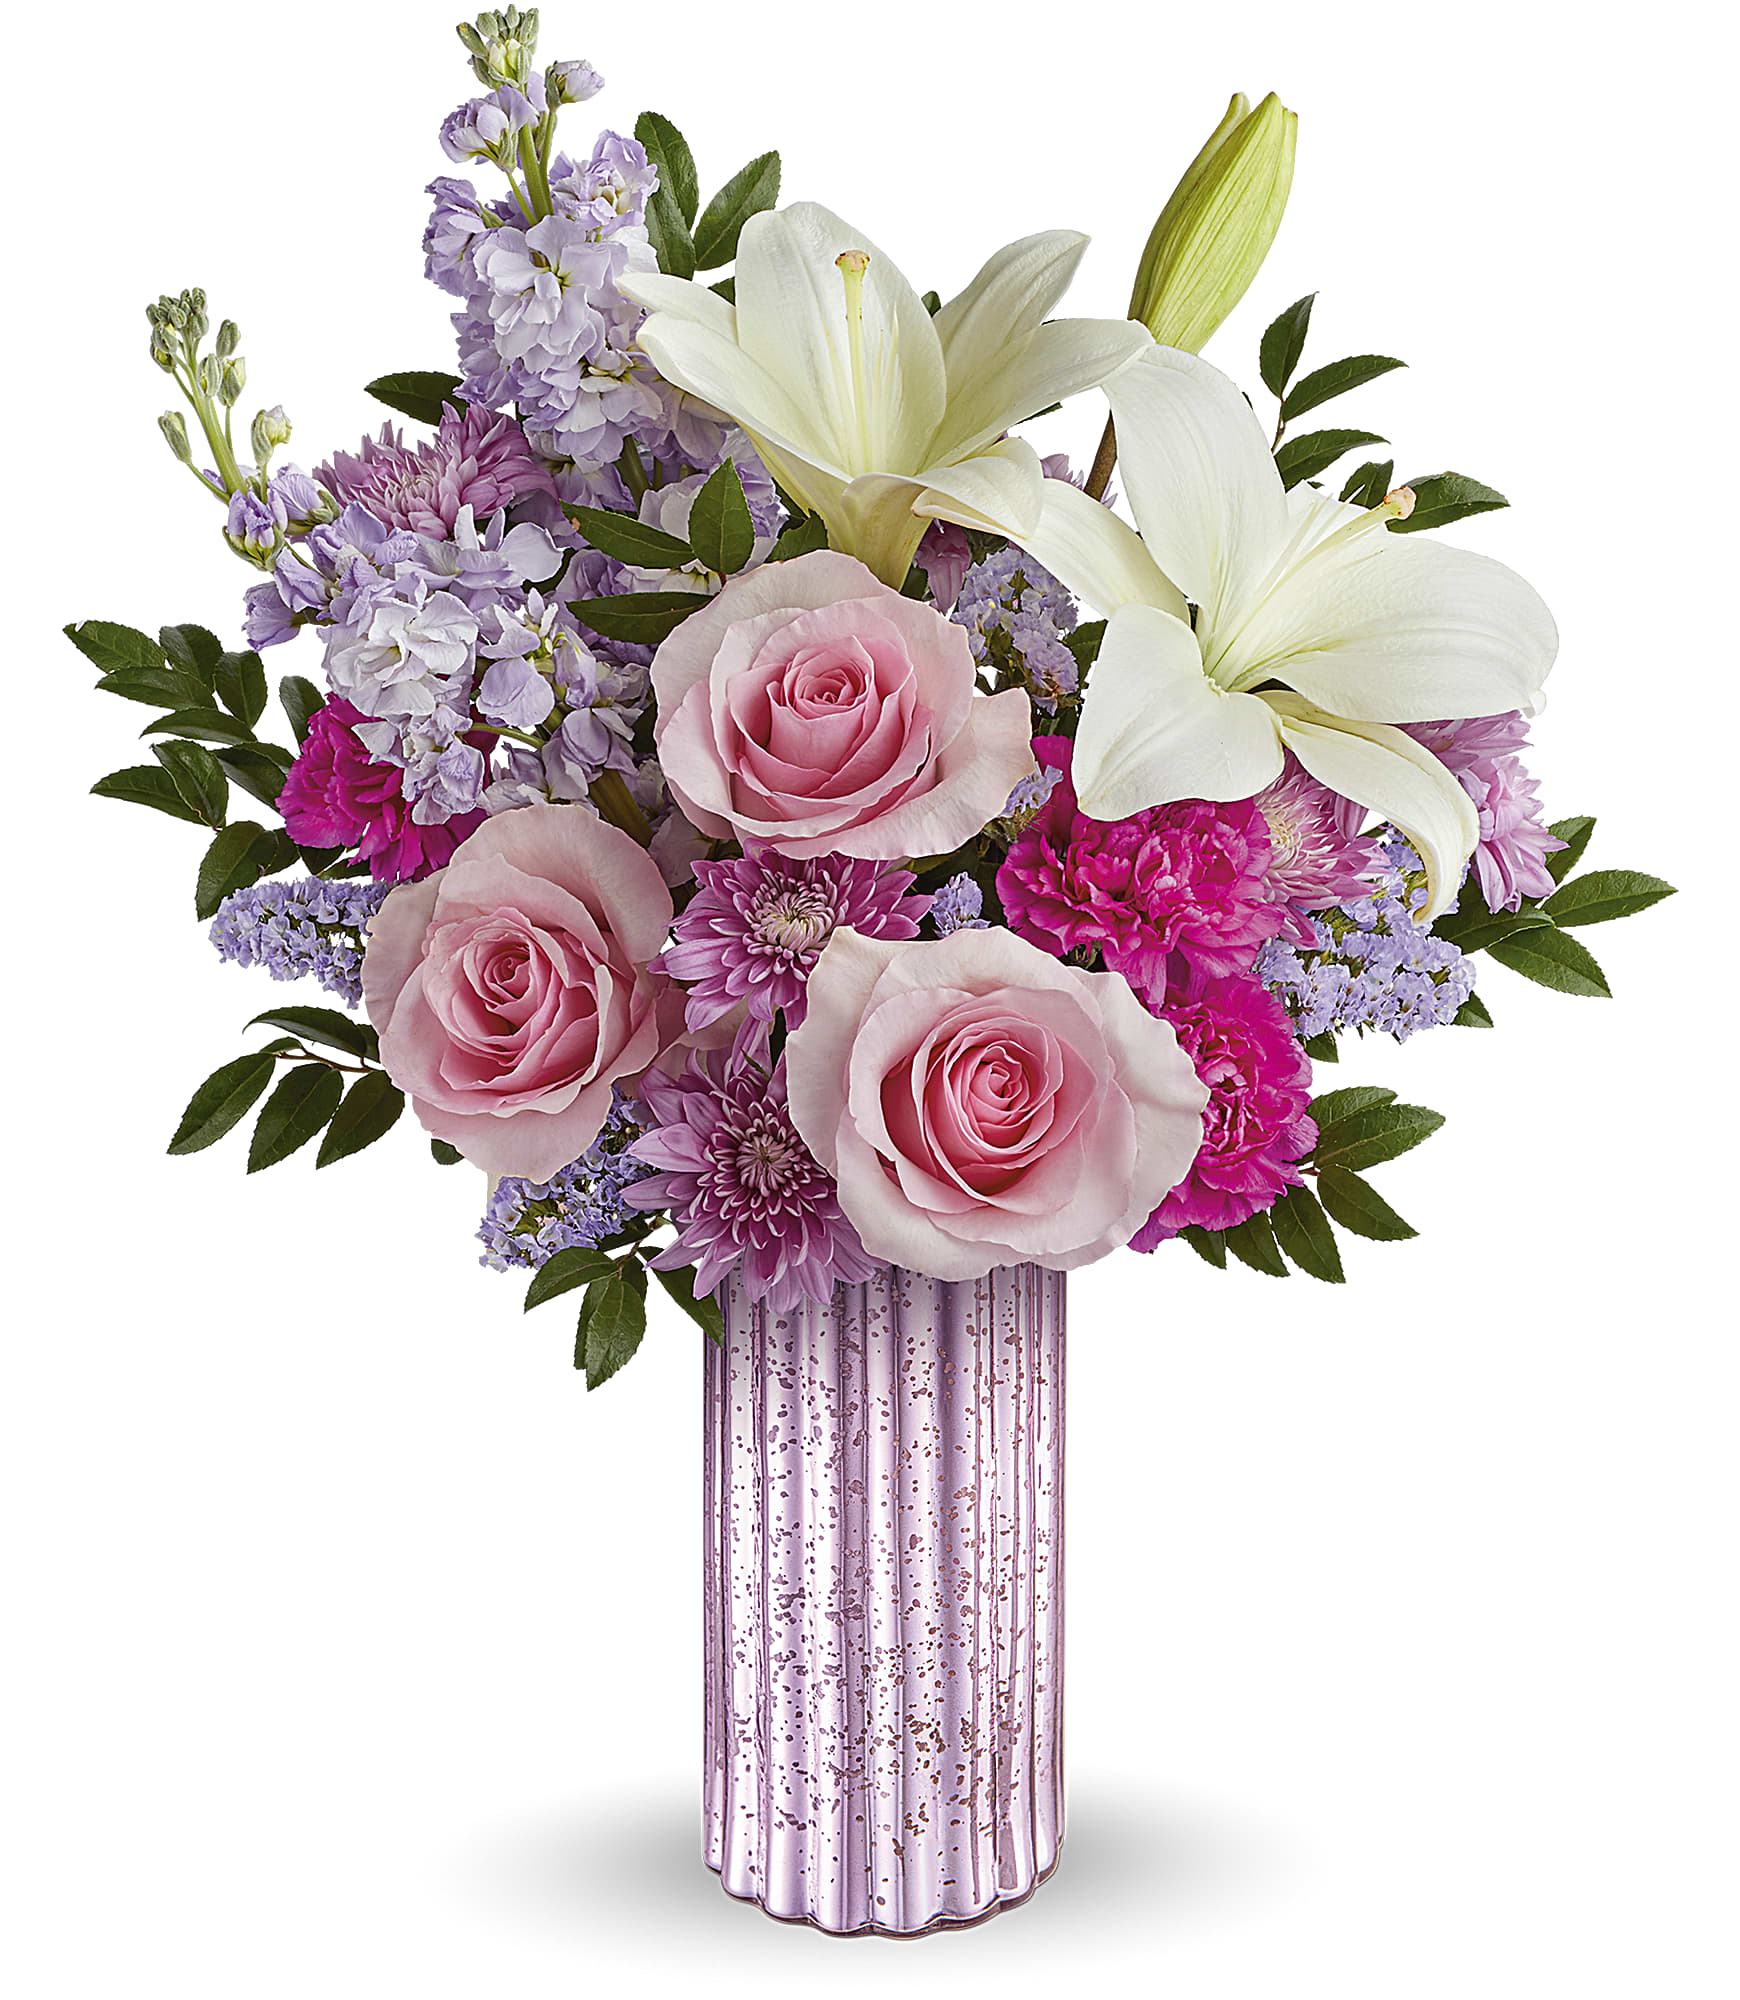 Sparkling Delight  - Sparkle up her Mother's Day with Teleflora's Sparkling Delight Bouquet, featuring a breathtaking bouquet of roses, lilies, and lavender accents elegantly presented in a sculpted glass vase with a lavender mercury-inspired finish.. Pink roses, white asiatic lilies, hot pink carnations, lavender stock, lavender cushion spray chrysanthemums, and sinuata statice are arranged with huckleberry in Teleflora's Sparkling Delight vase, creating a stunning Mother's Day bouquet. Approximately 17 1/4&quot; W x 19&quot; H